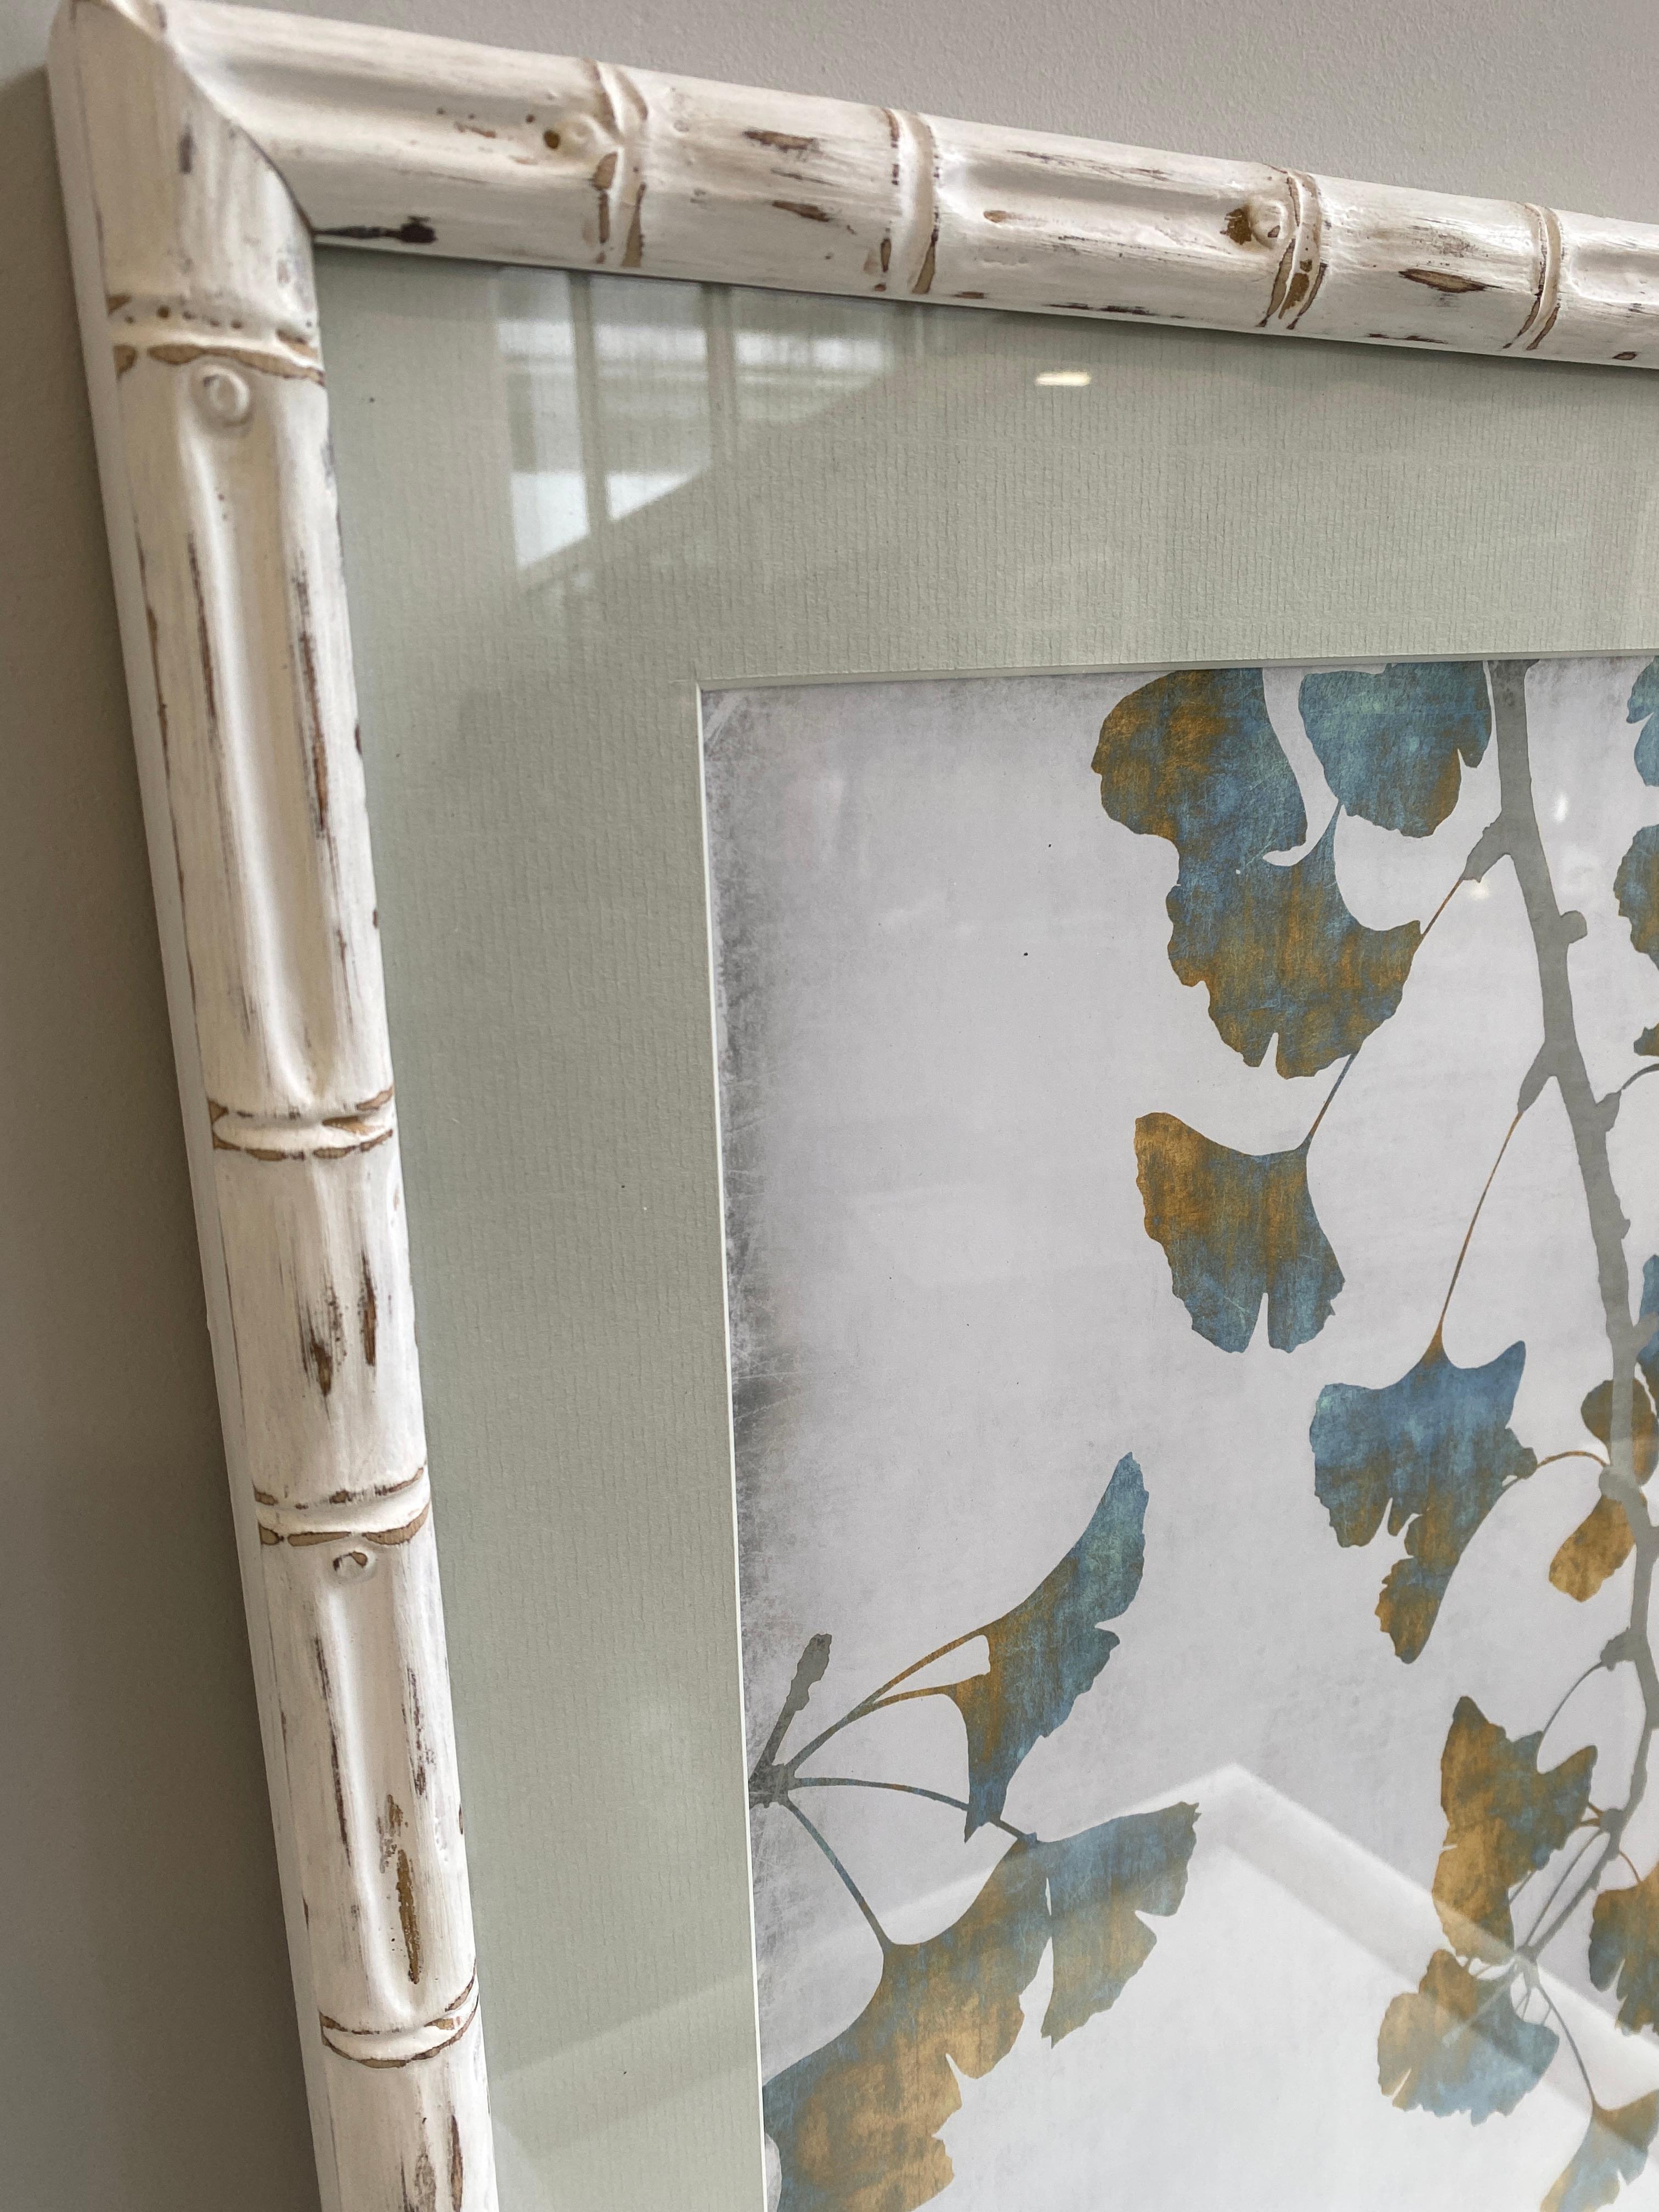 Elegant hand-watercoloured Ginko plant silhouette printed on aged white paper and black mirrors and silver-painted wood.
It is an object of high quality and refinement, ideal for giving elegance to your environments.

Each print is an artisanal